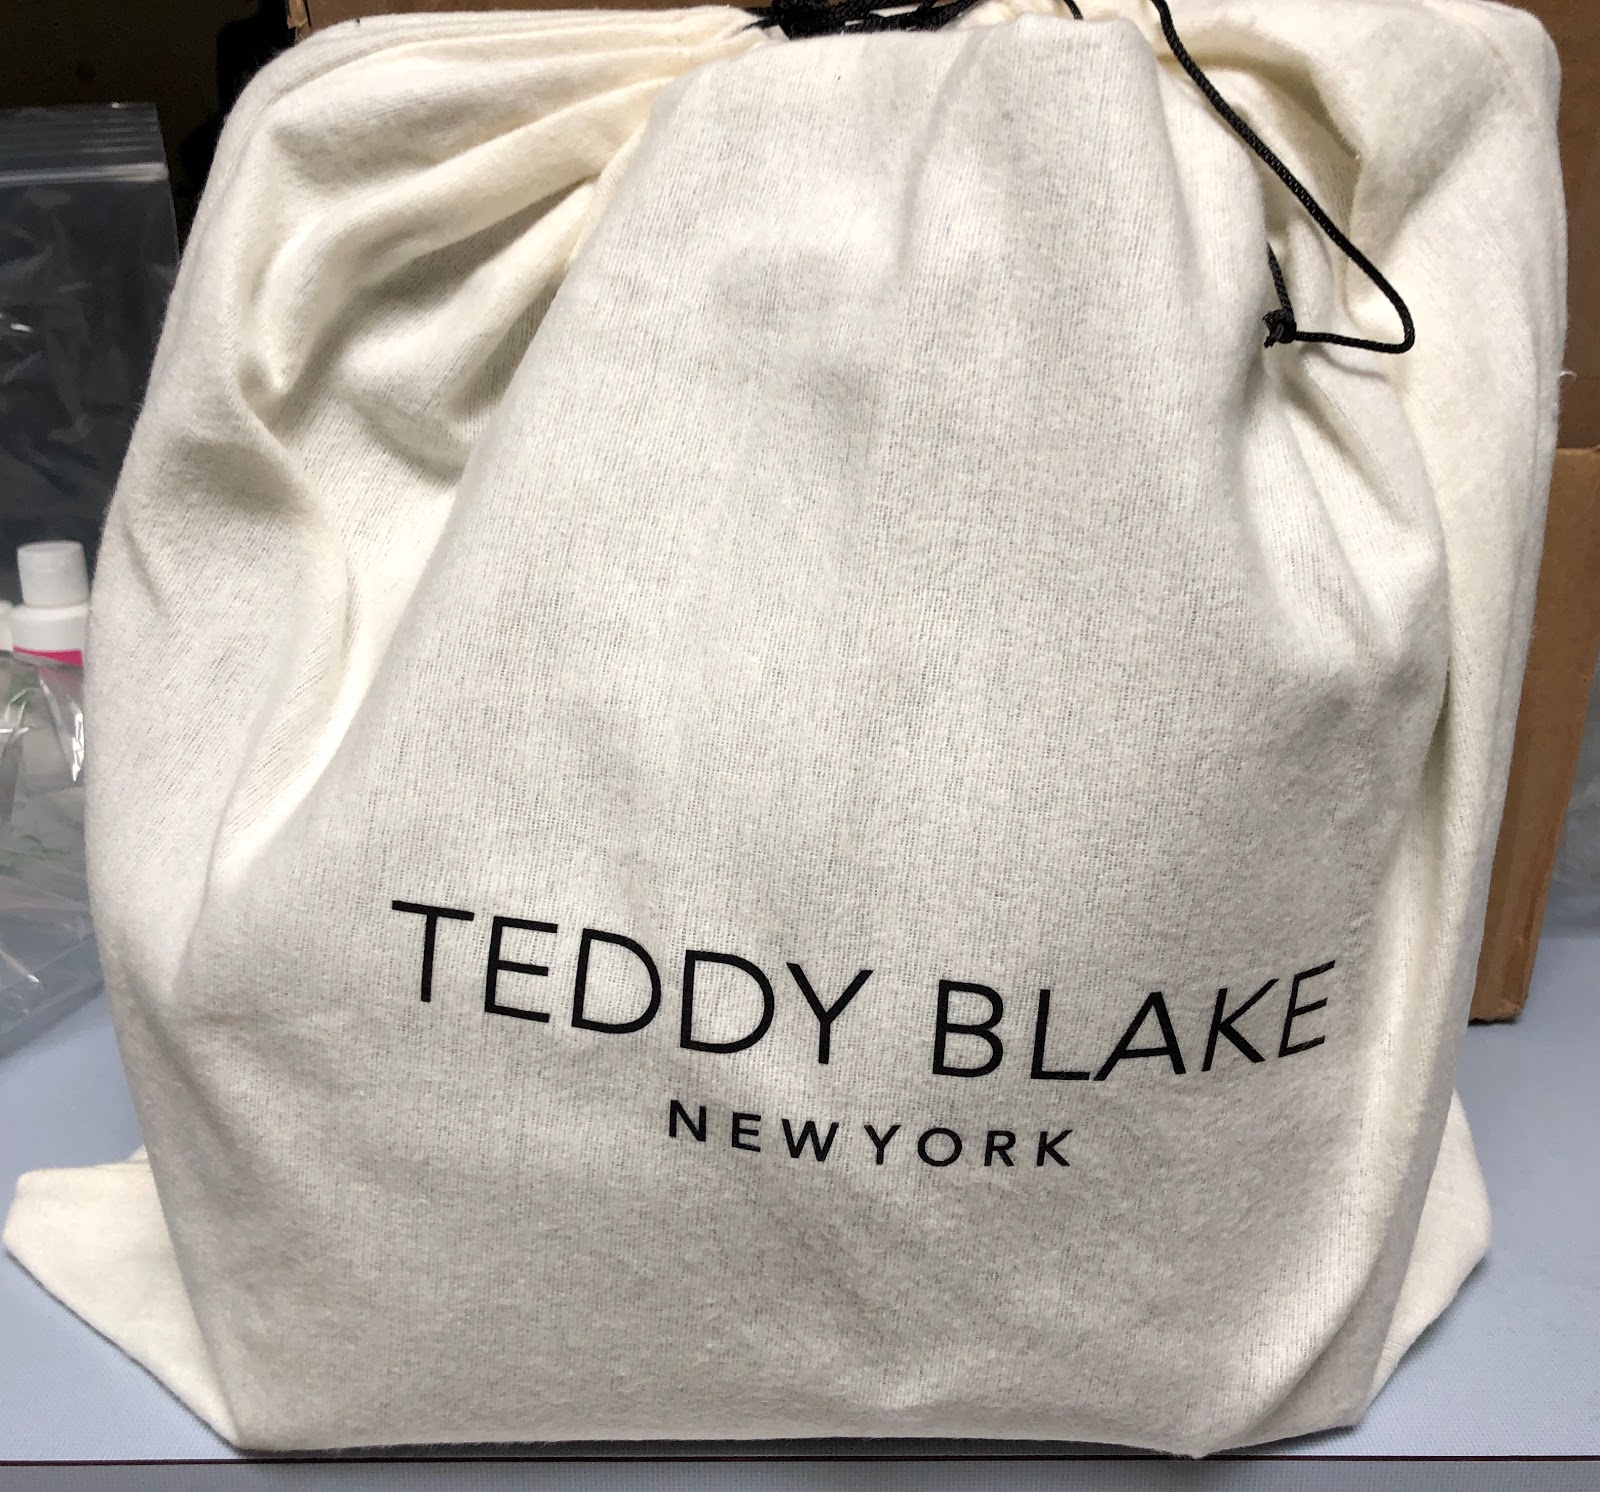 How To Assess The Quality Of A Handbag (Teddy Blake Review) 